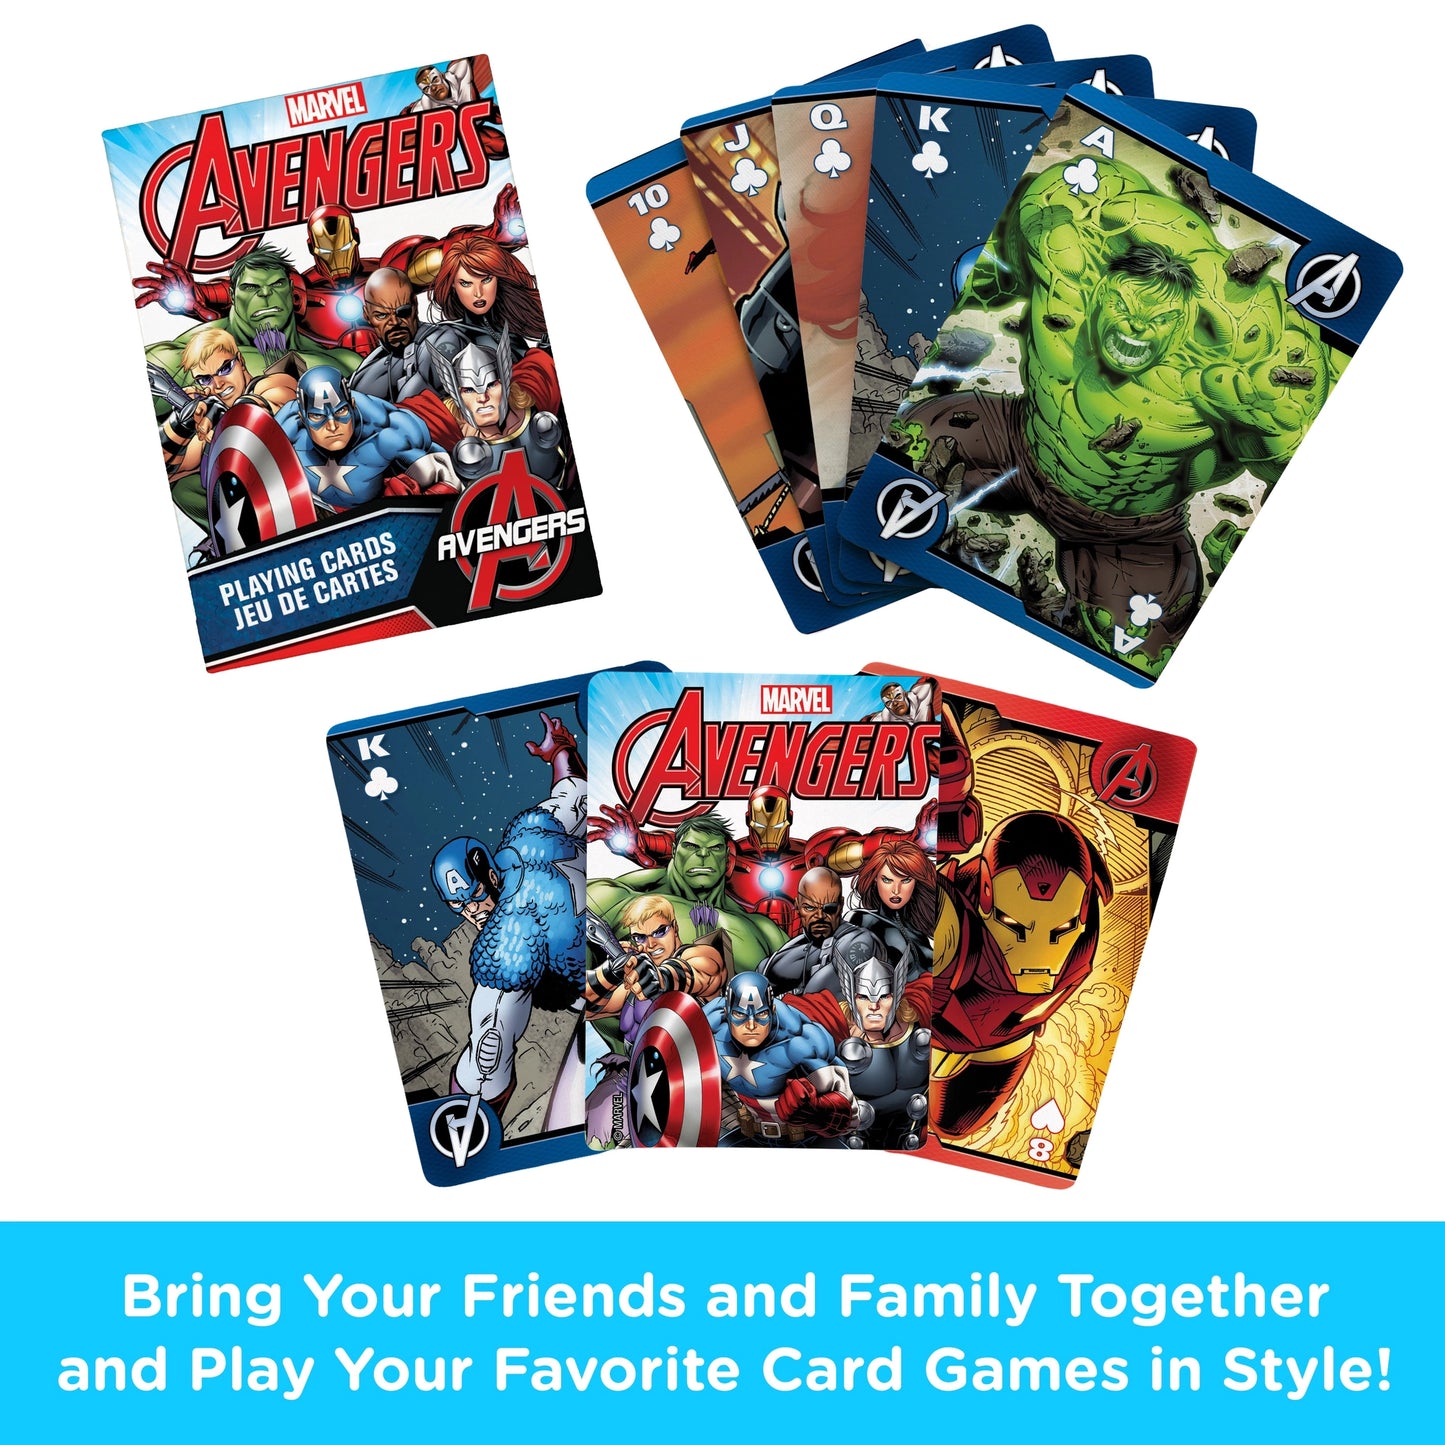 Marvel Comics Avengers Playing Cards - With Great Power Comes Great Responsibility